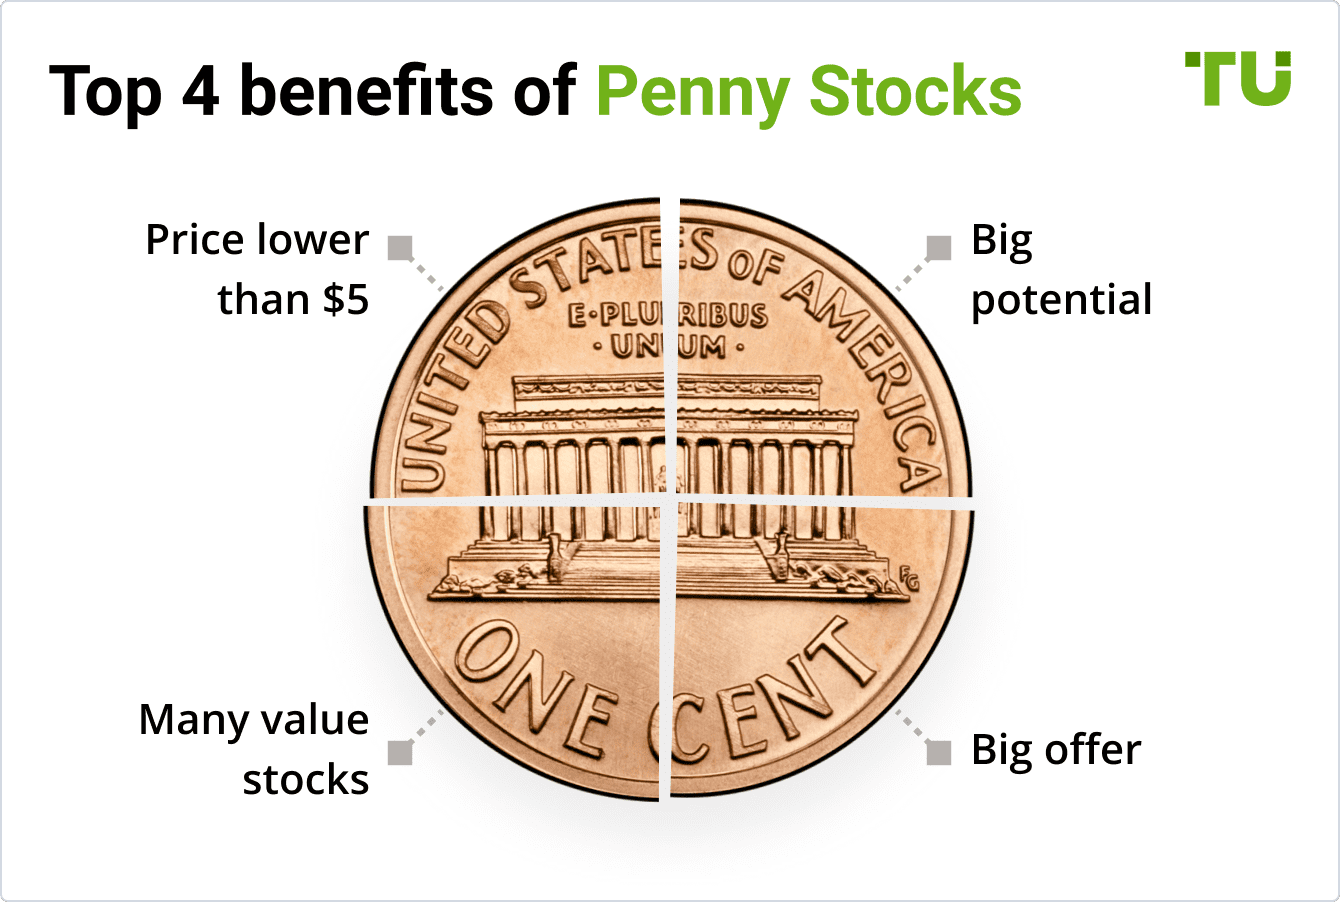 Top 4 benefits of Penny Stocks